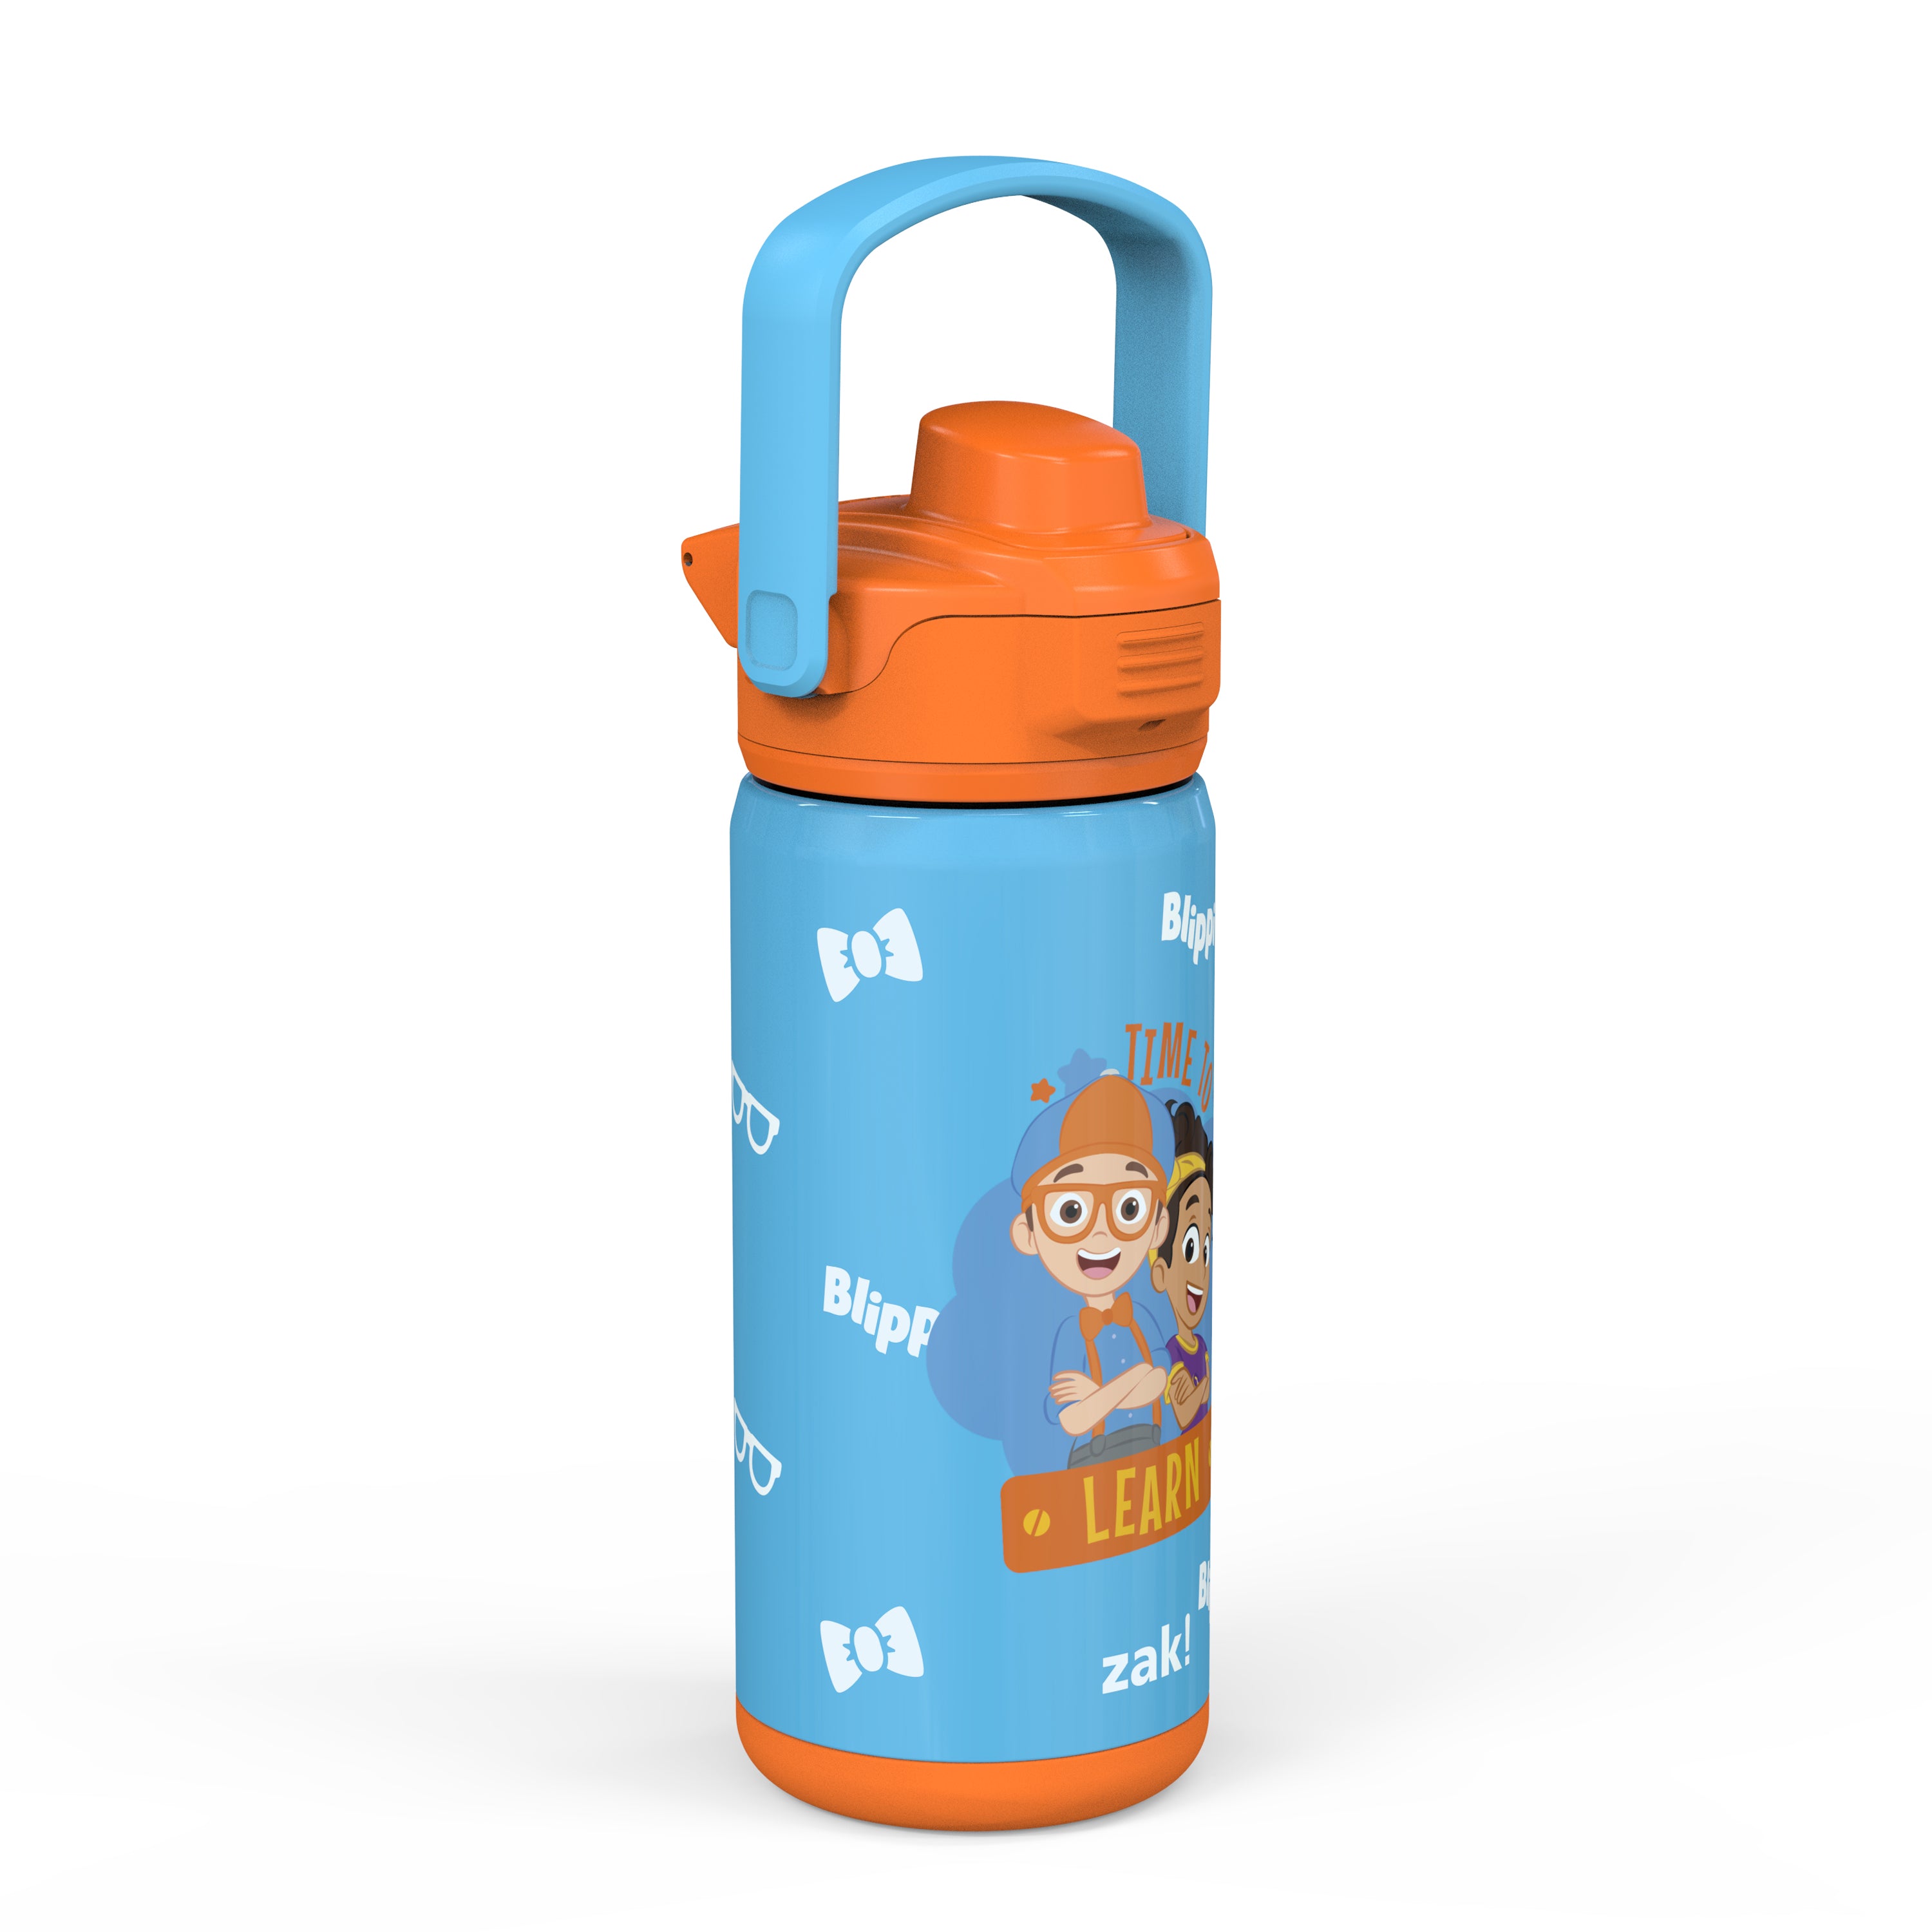 Blippi Beacon Stainless Steel Insulated Kids Water Bottle with Covered Spout, 14 Ounces